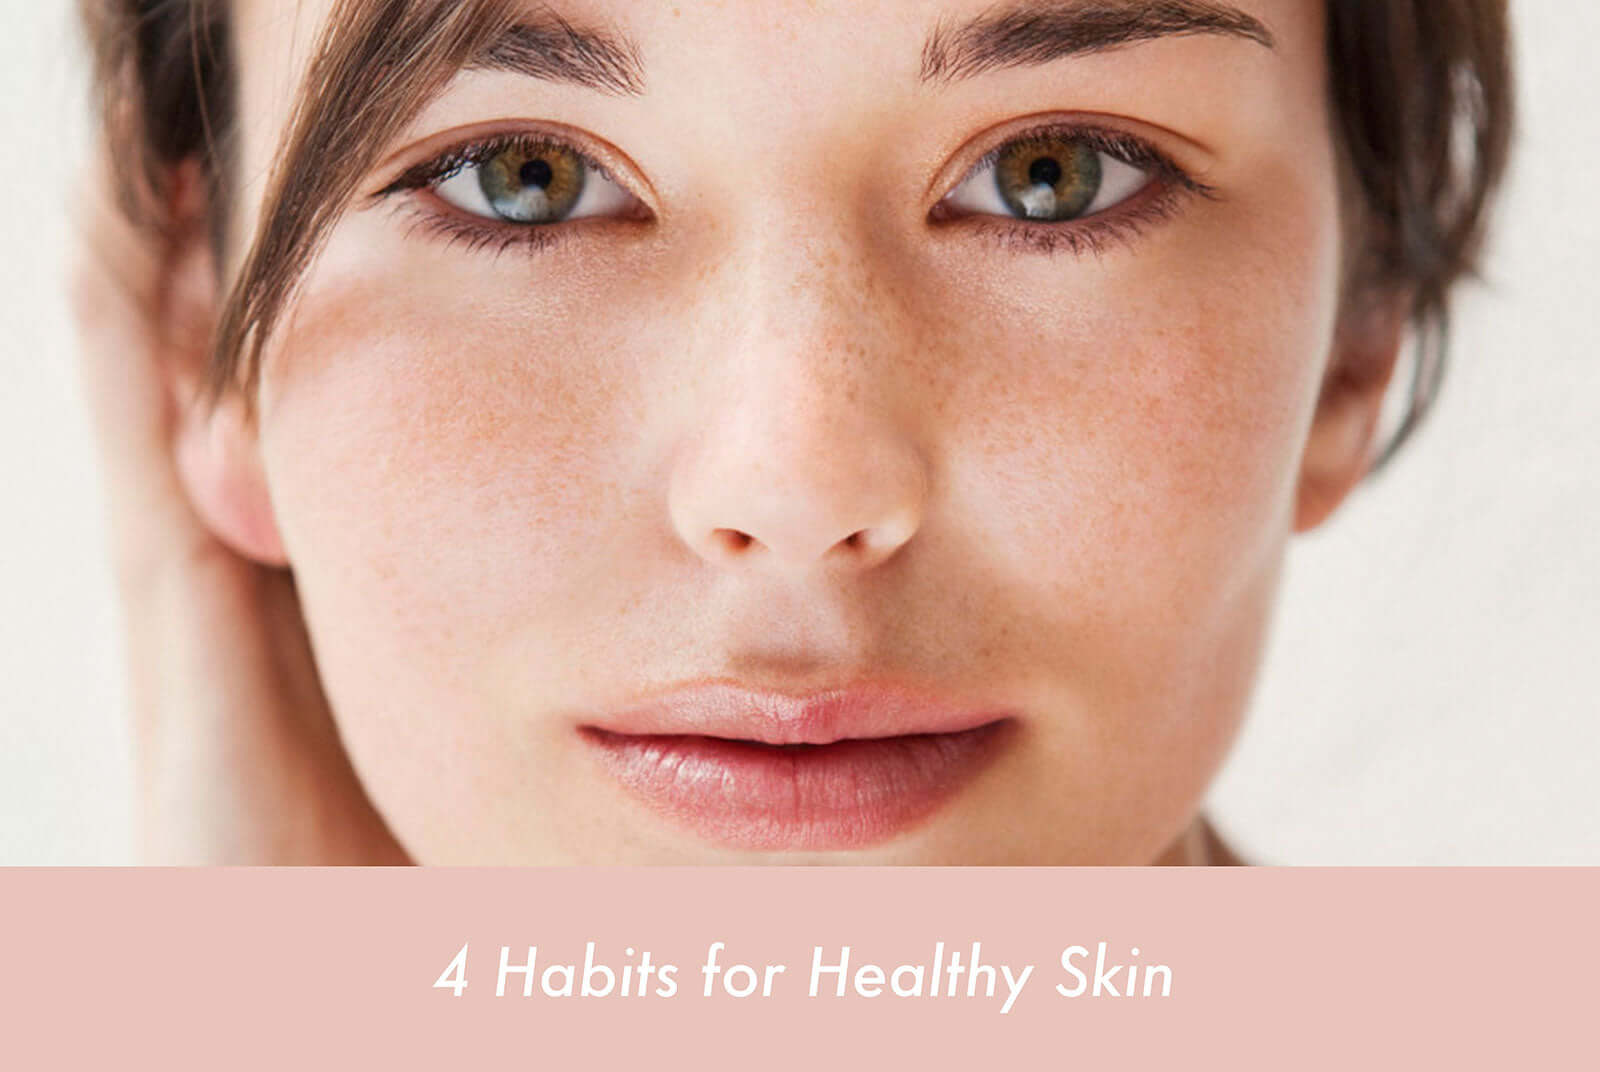 Lifestyle habits to achieve that healthy skin glow!